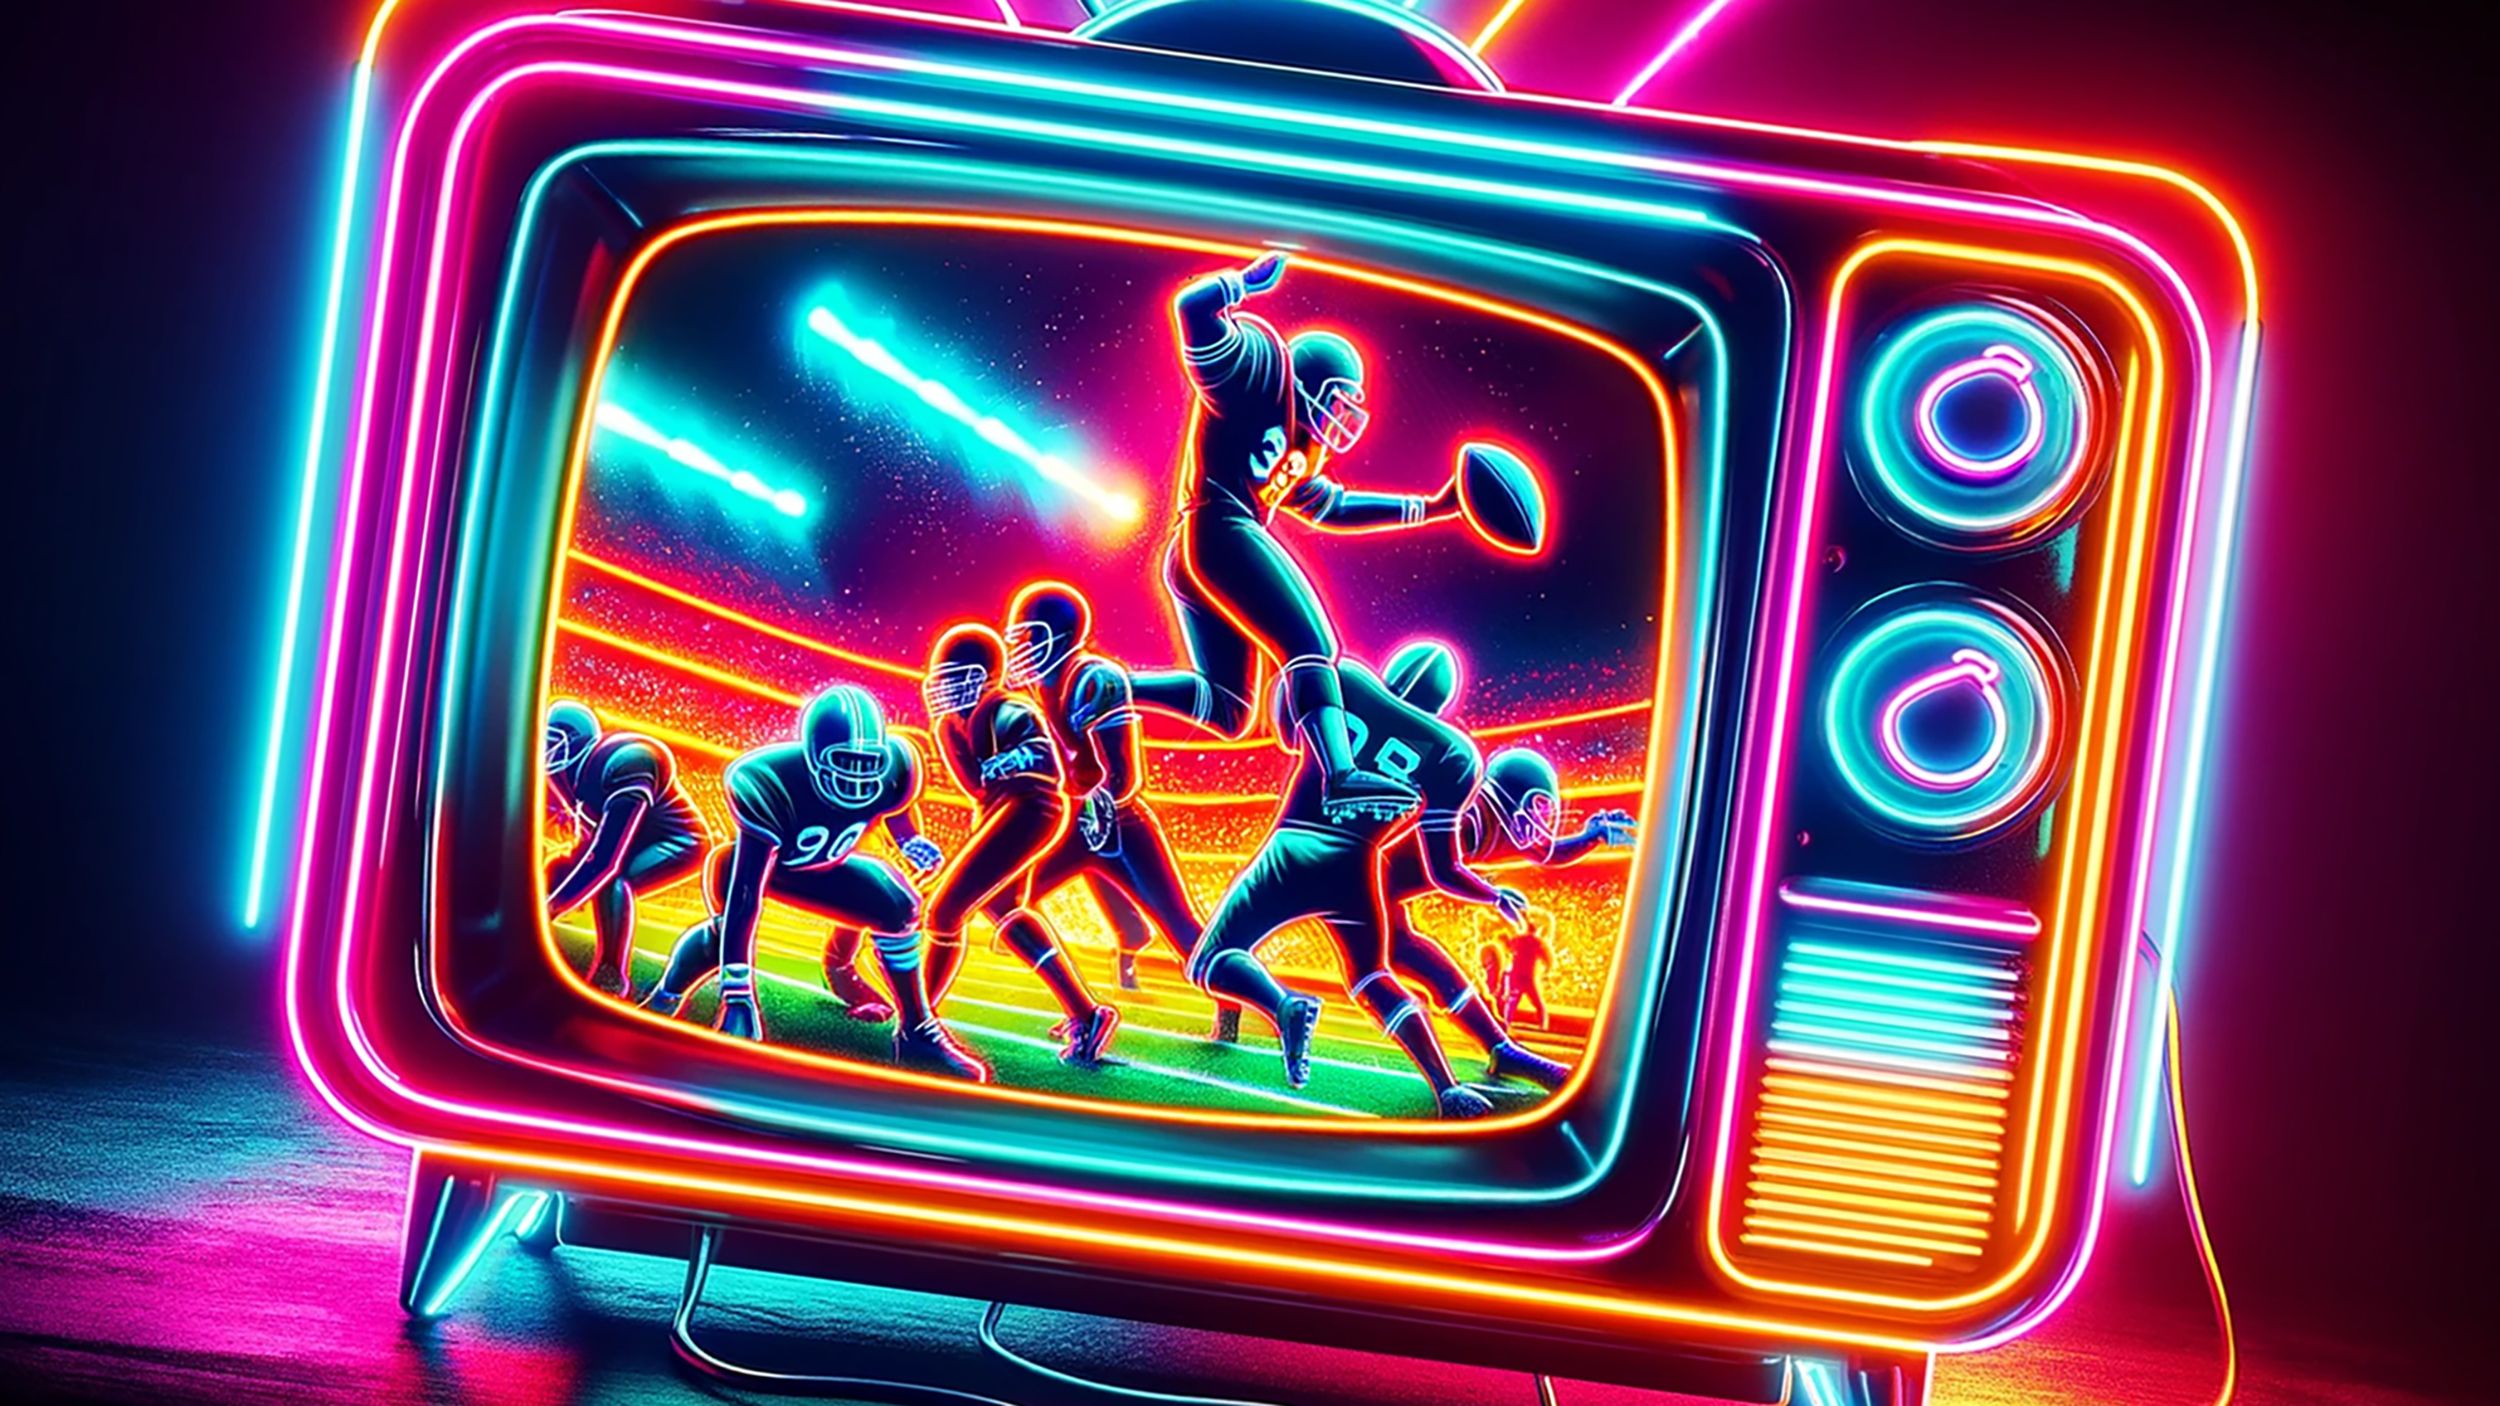 Neon art piece that features a vintage television set, with vibrant neon colors highlighting its contours and the screen displaying a dynamic-1